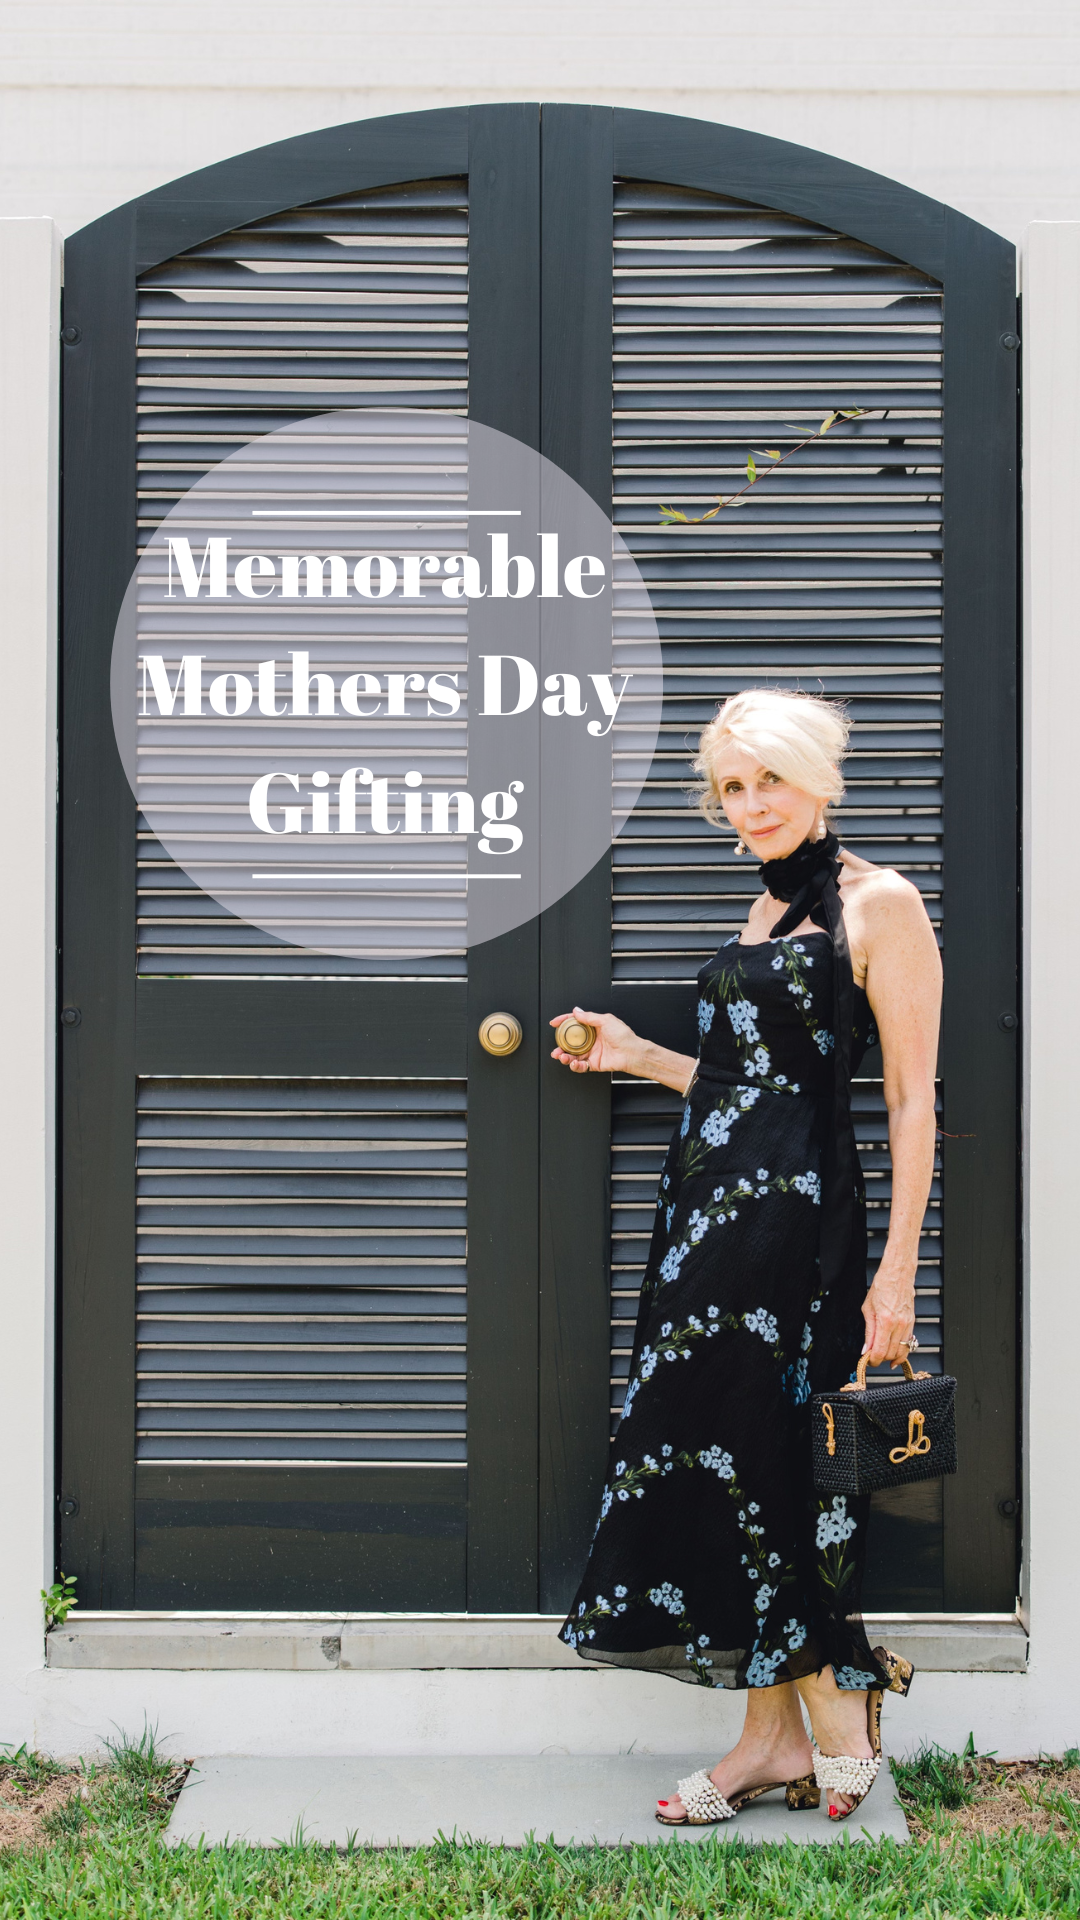 Memorable Mother’s Day Gifting